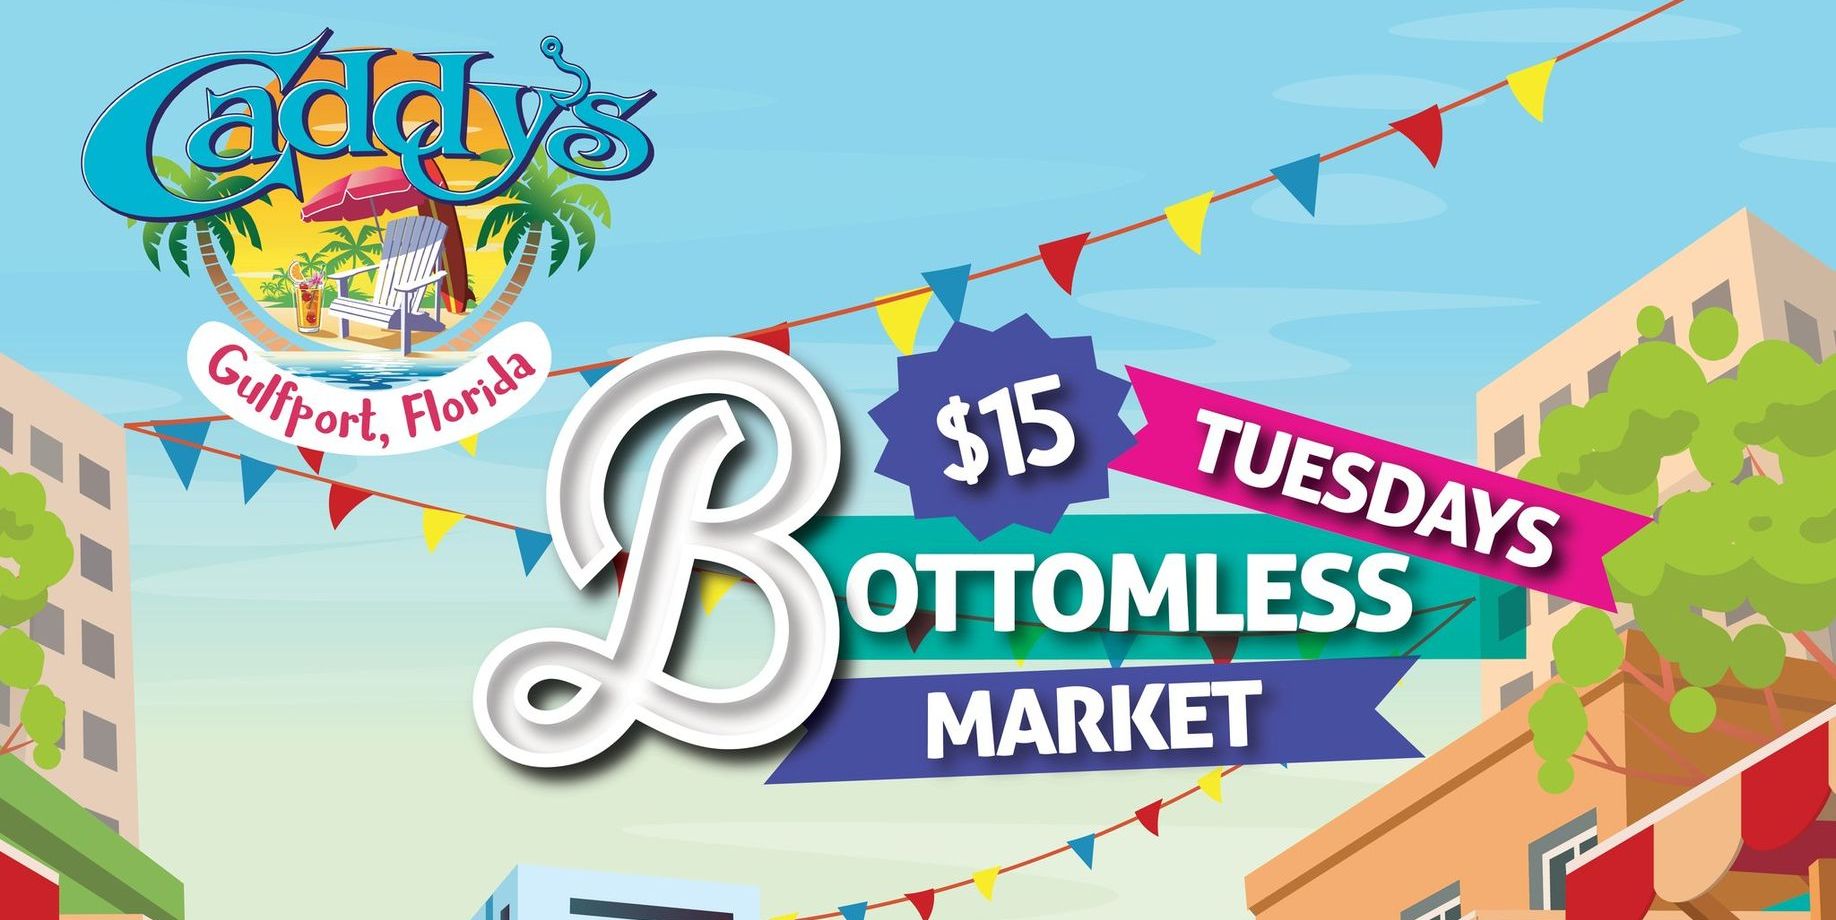 Read more about the article Tuesdays Bottomless Market!